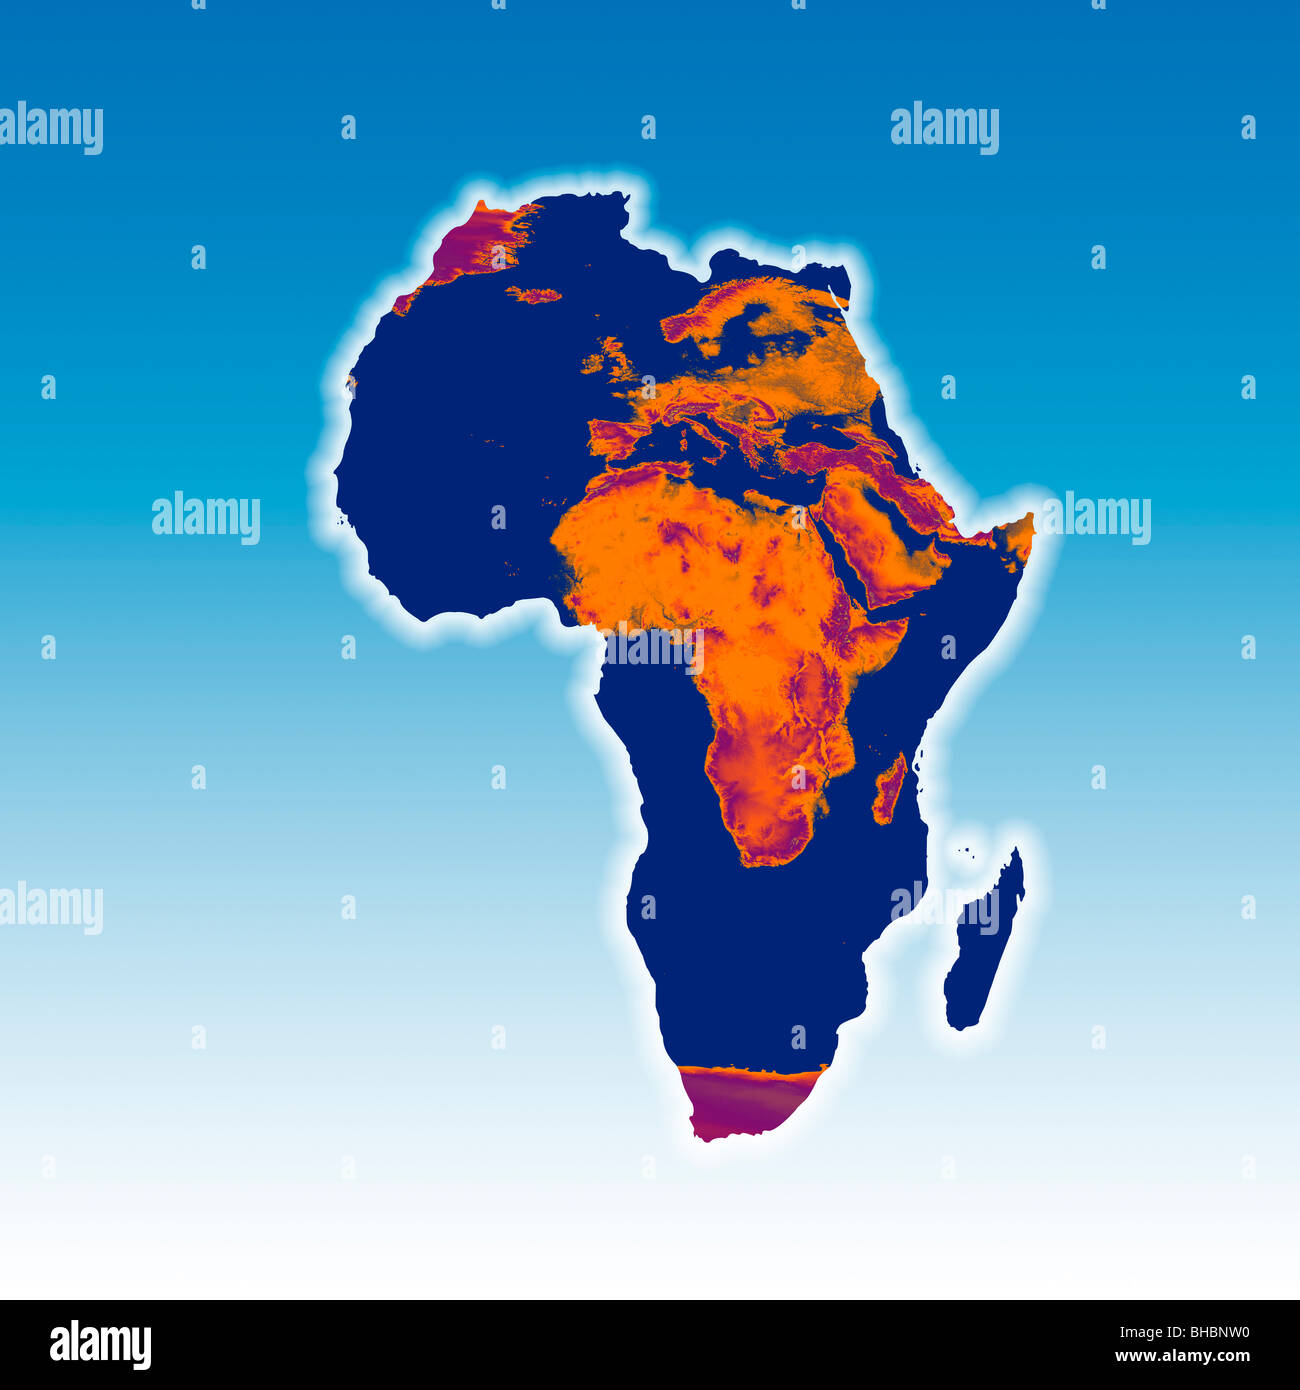 Map of Africa with a burnt image of Africa and Europe overlaid. Conceptual image representing global warming and desertification Stock Photo